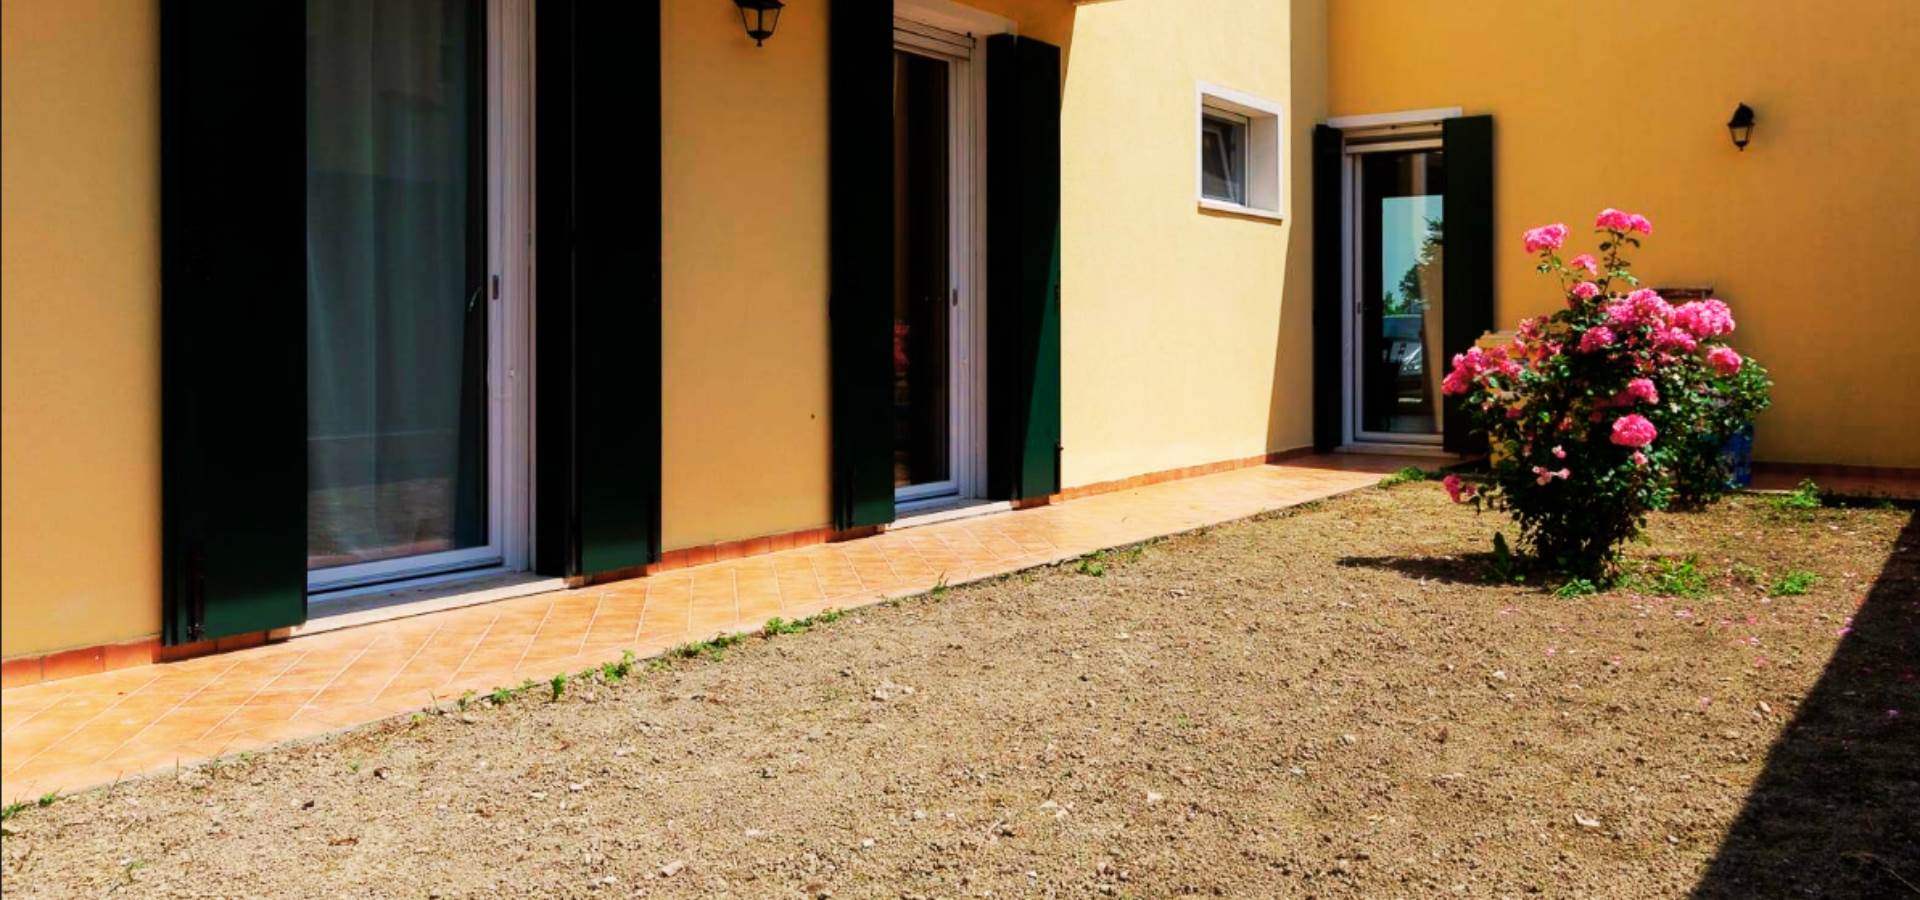 TEGLIO VENETO, Apartment for sale of 74 Sq. mt., Excellent Condition, Heating Individual heating system, Energetic class: C, placed at Ground, composed by: 3 Rooms, Kitchenette, 2 Bedrooms, 1 